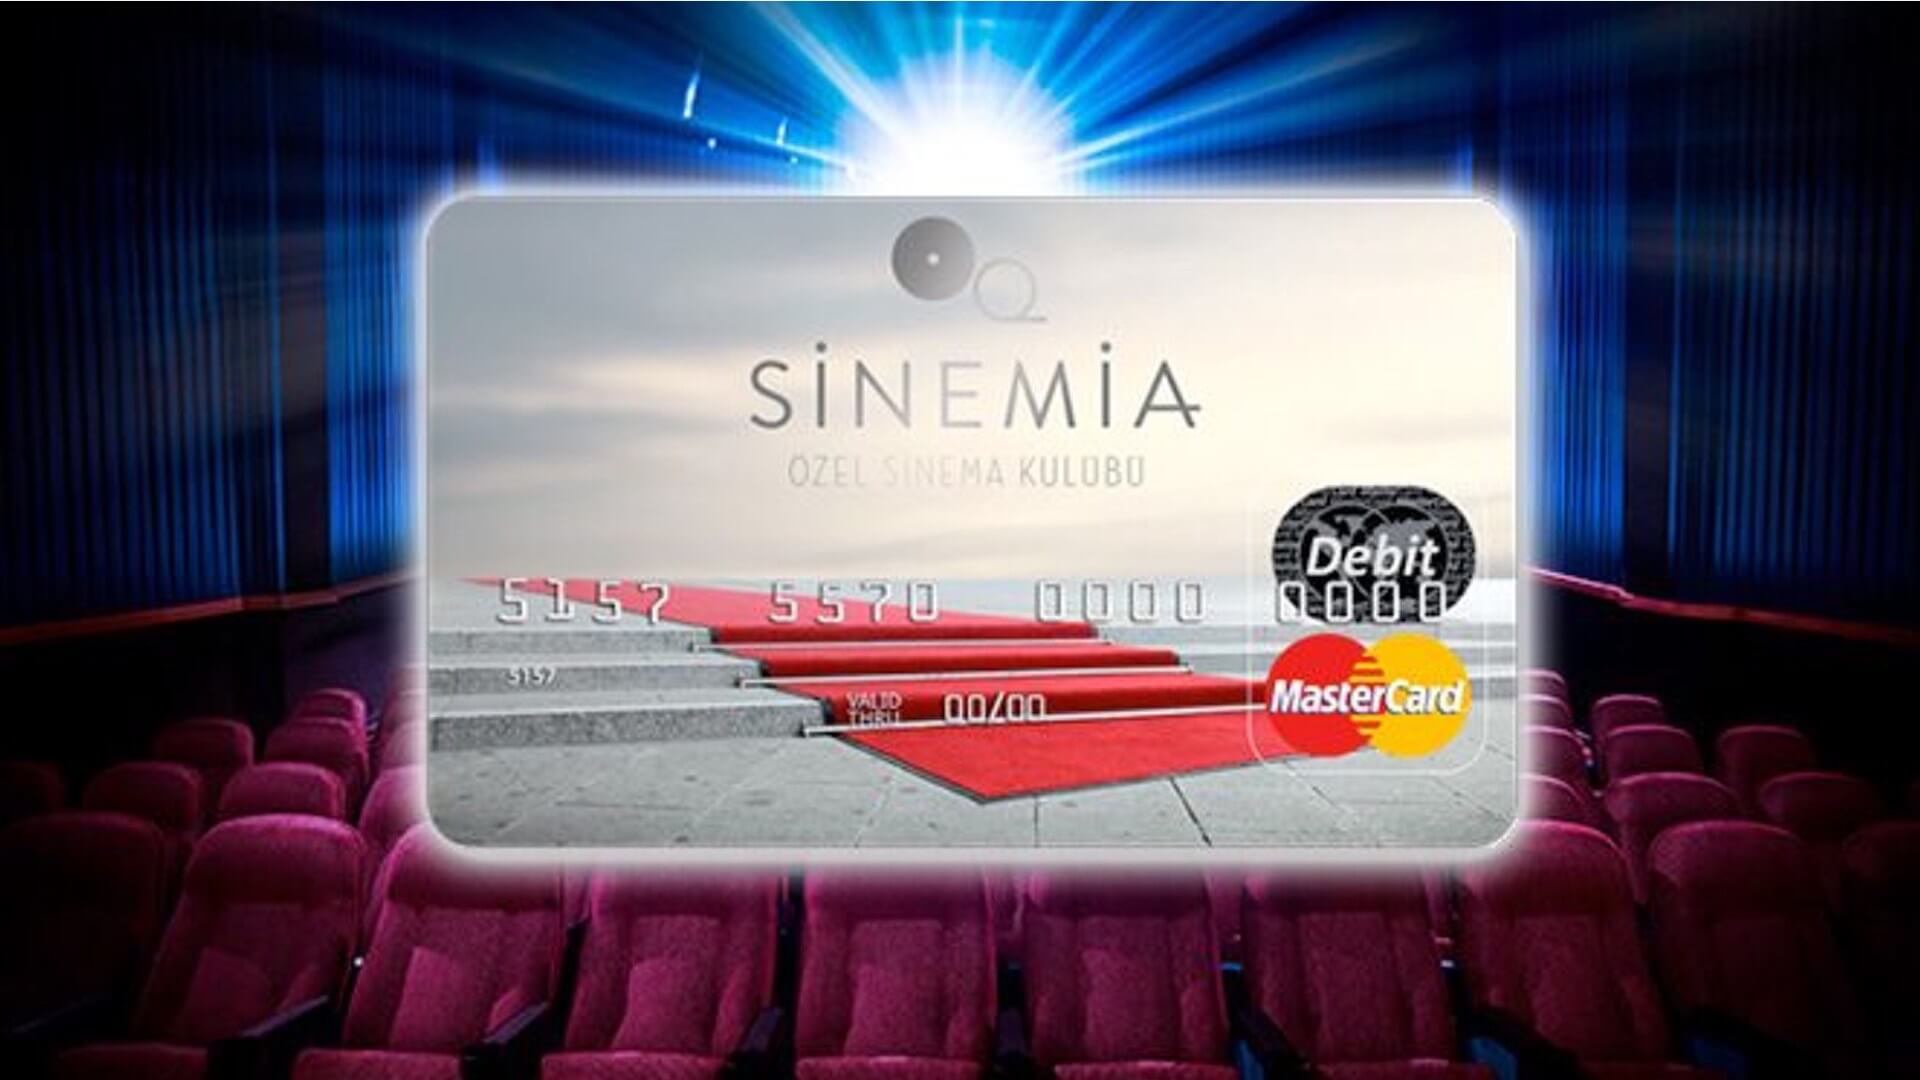 Sinemia confirms canceled accounts fraudulently misused the service